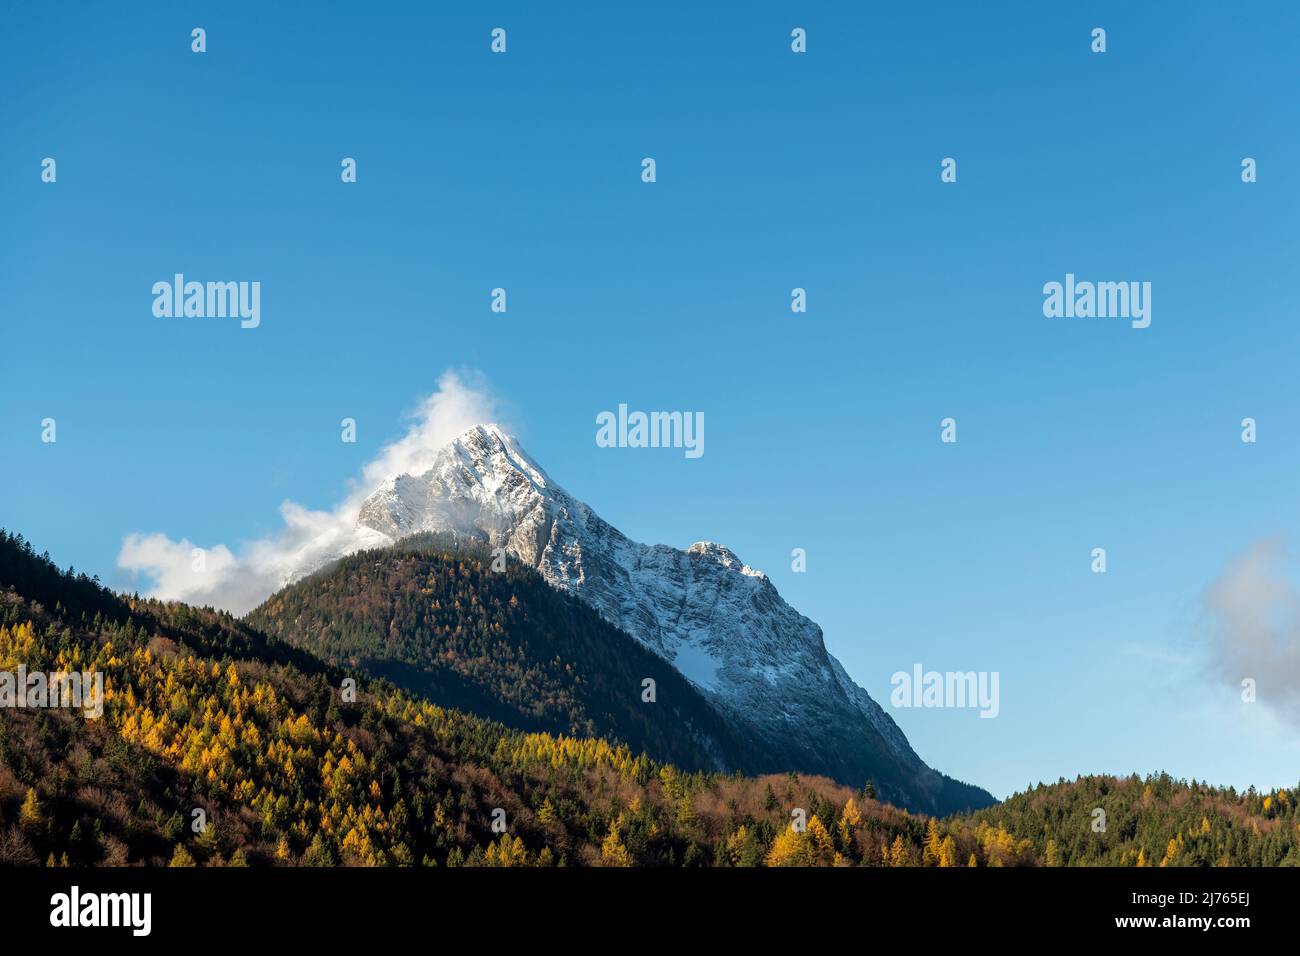 The Wetterstein, part of the mountain range of the same name between Garmisch-Partenkirchen and Mittenwald, seen from the village in autumn leaves and blue sky, with snow on the mountain. Stock Photo